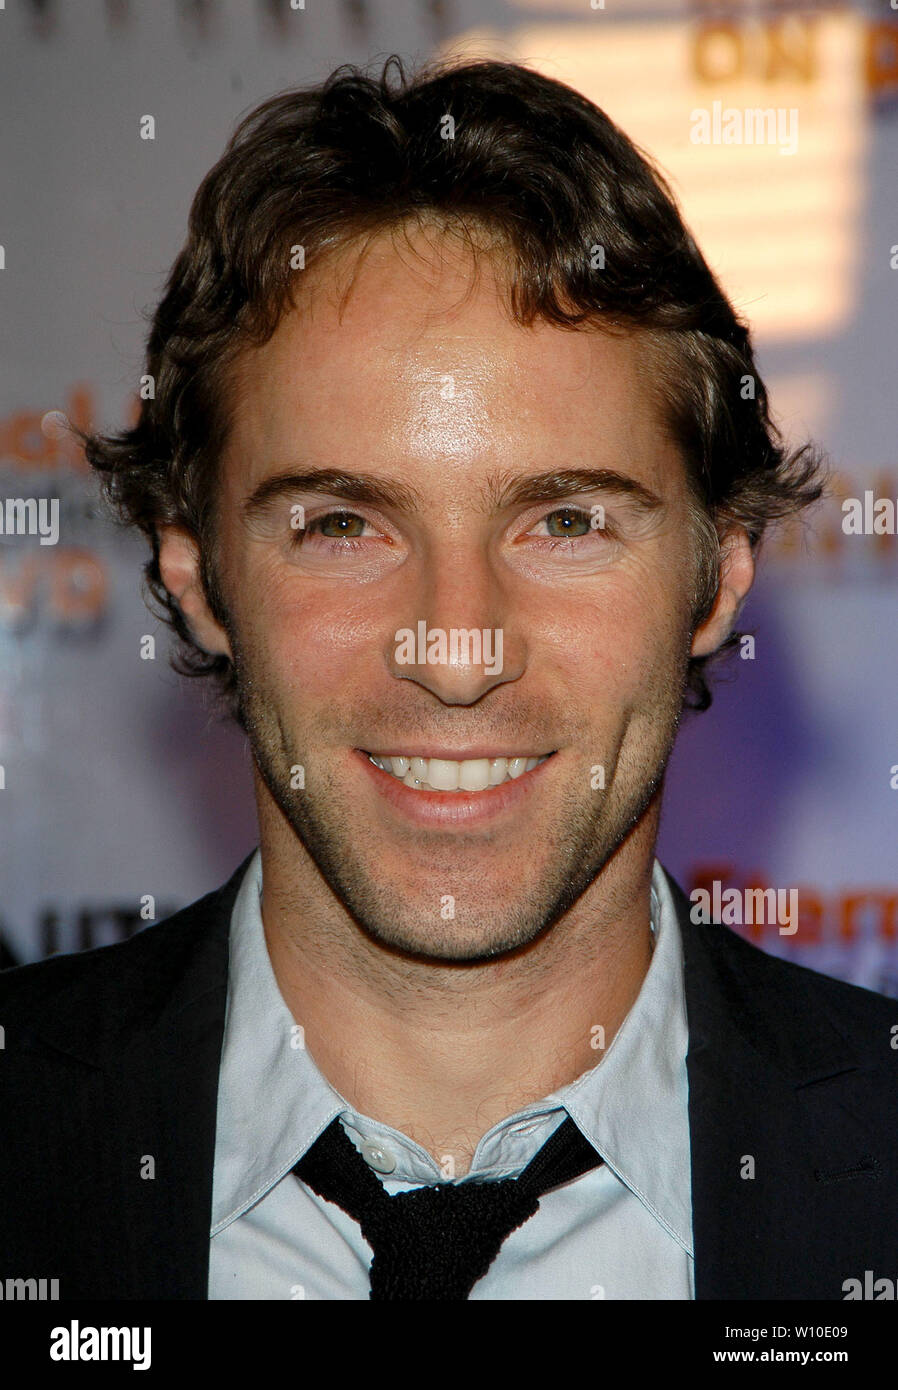 Alessandro Nivola at the 'Enternal Sunshine of the Spotless Mind' DVD Launch Party held across the street from LACMA, 5900 Wilshire Blvd. building in Los Angeles, CA. The event took place on Thursday, September 23, 2004.  Photo by: SBM / PictureLux - All Rights Reserved   - File Reference # 33790-6683SBMPLX Stock Photo